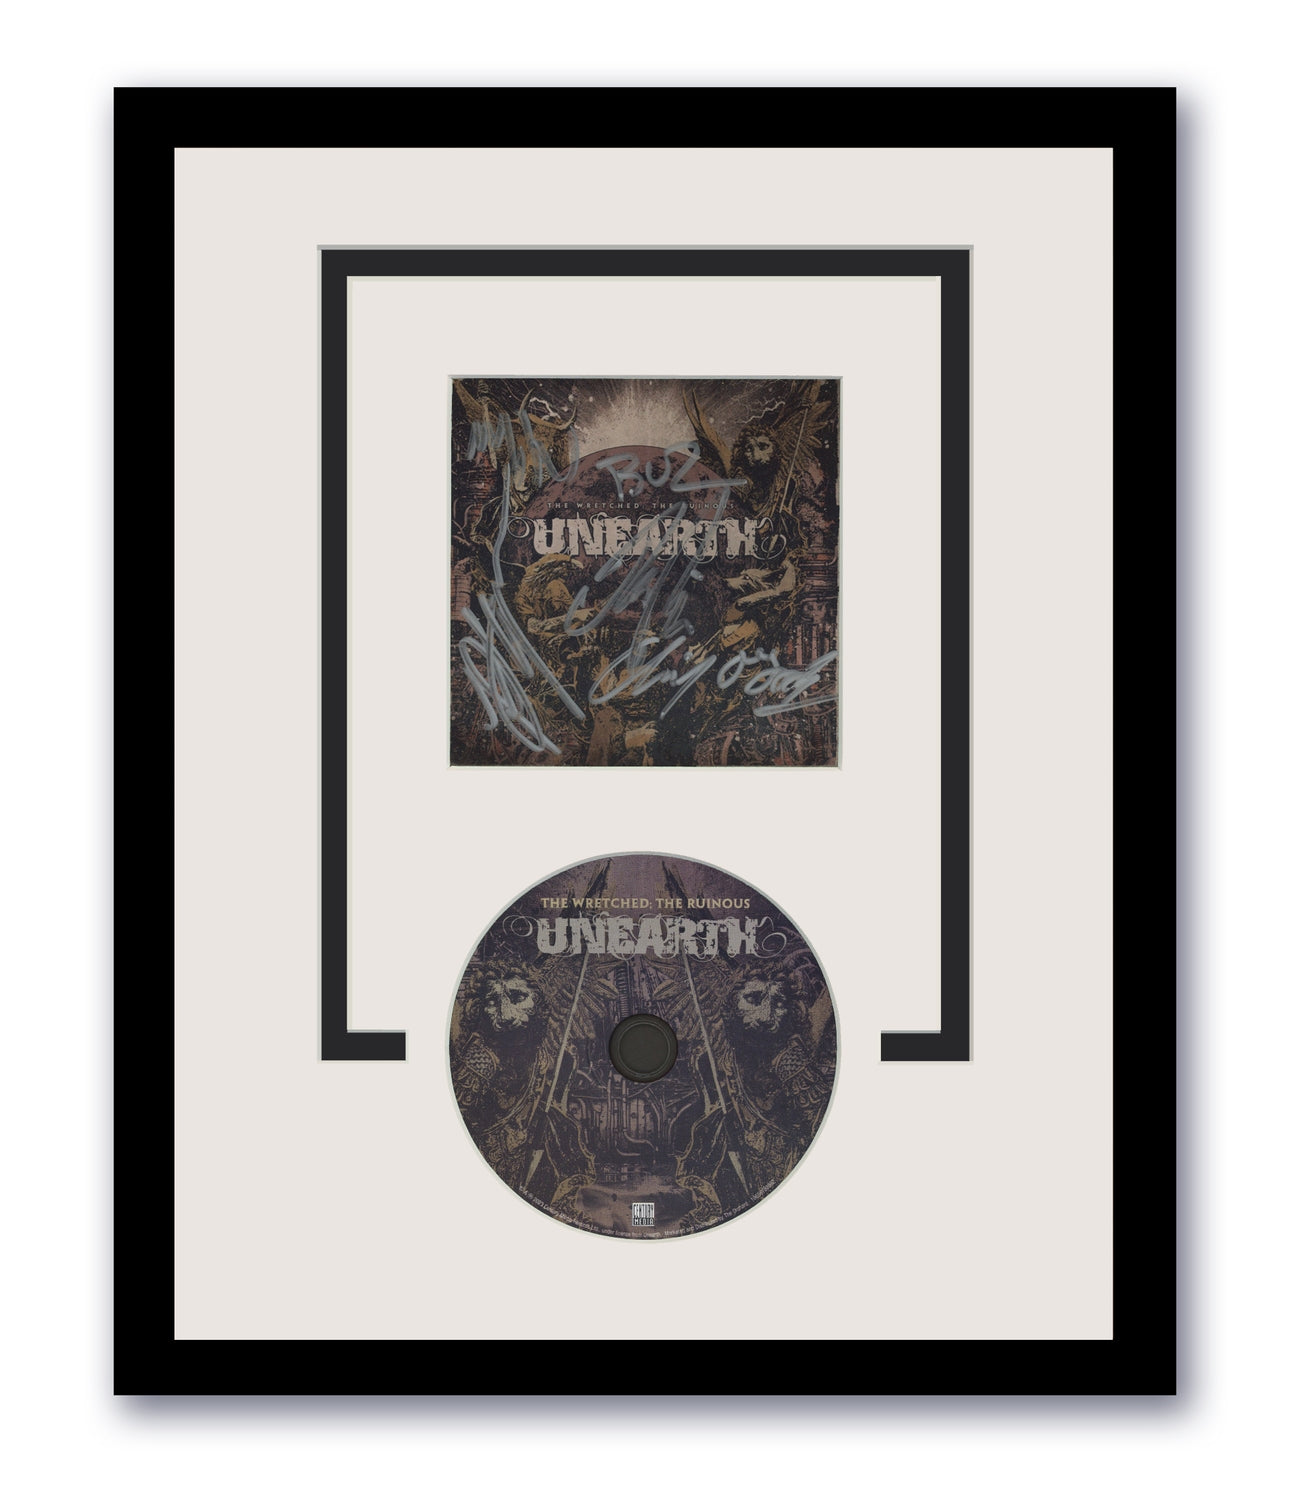 Unearth Signed 11x14 Framed CD The Wretched The Ruinous Autographed ACOA